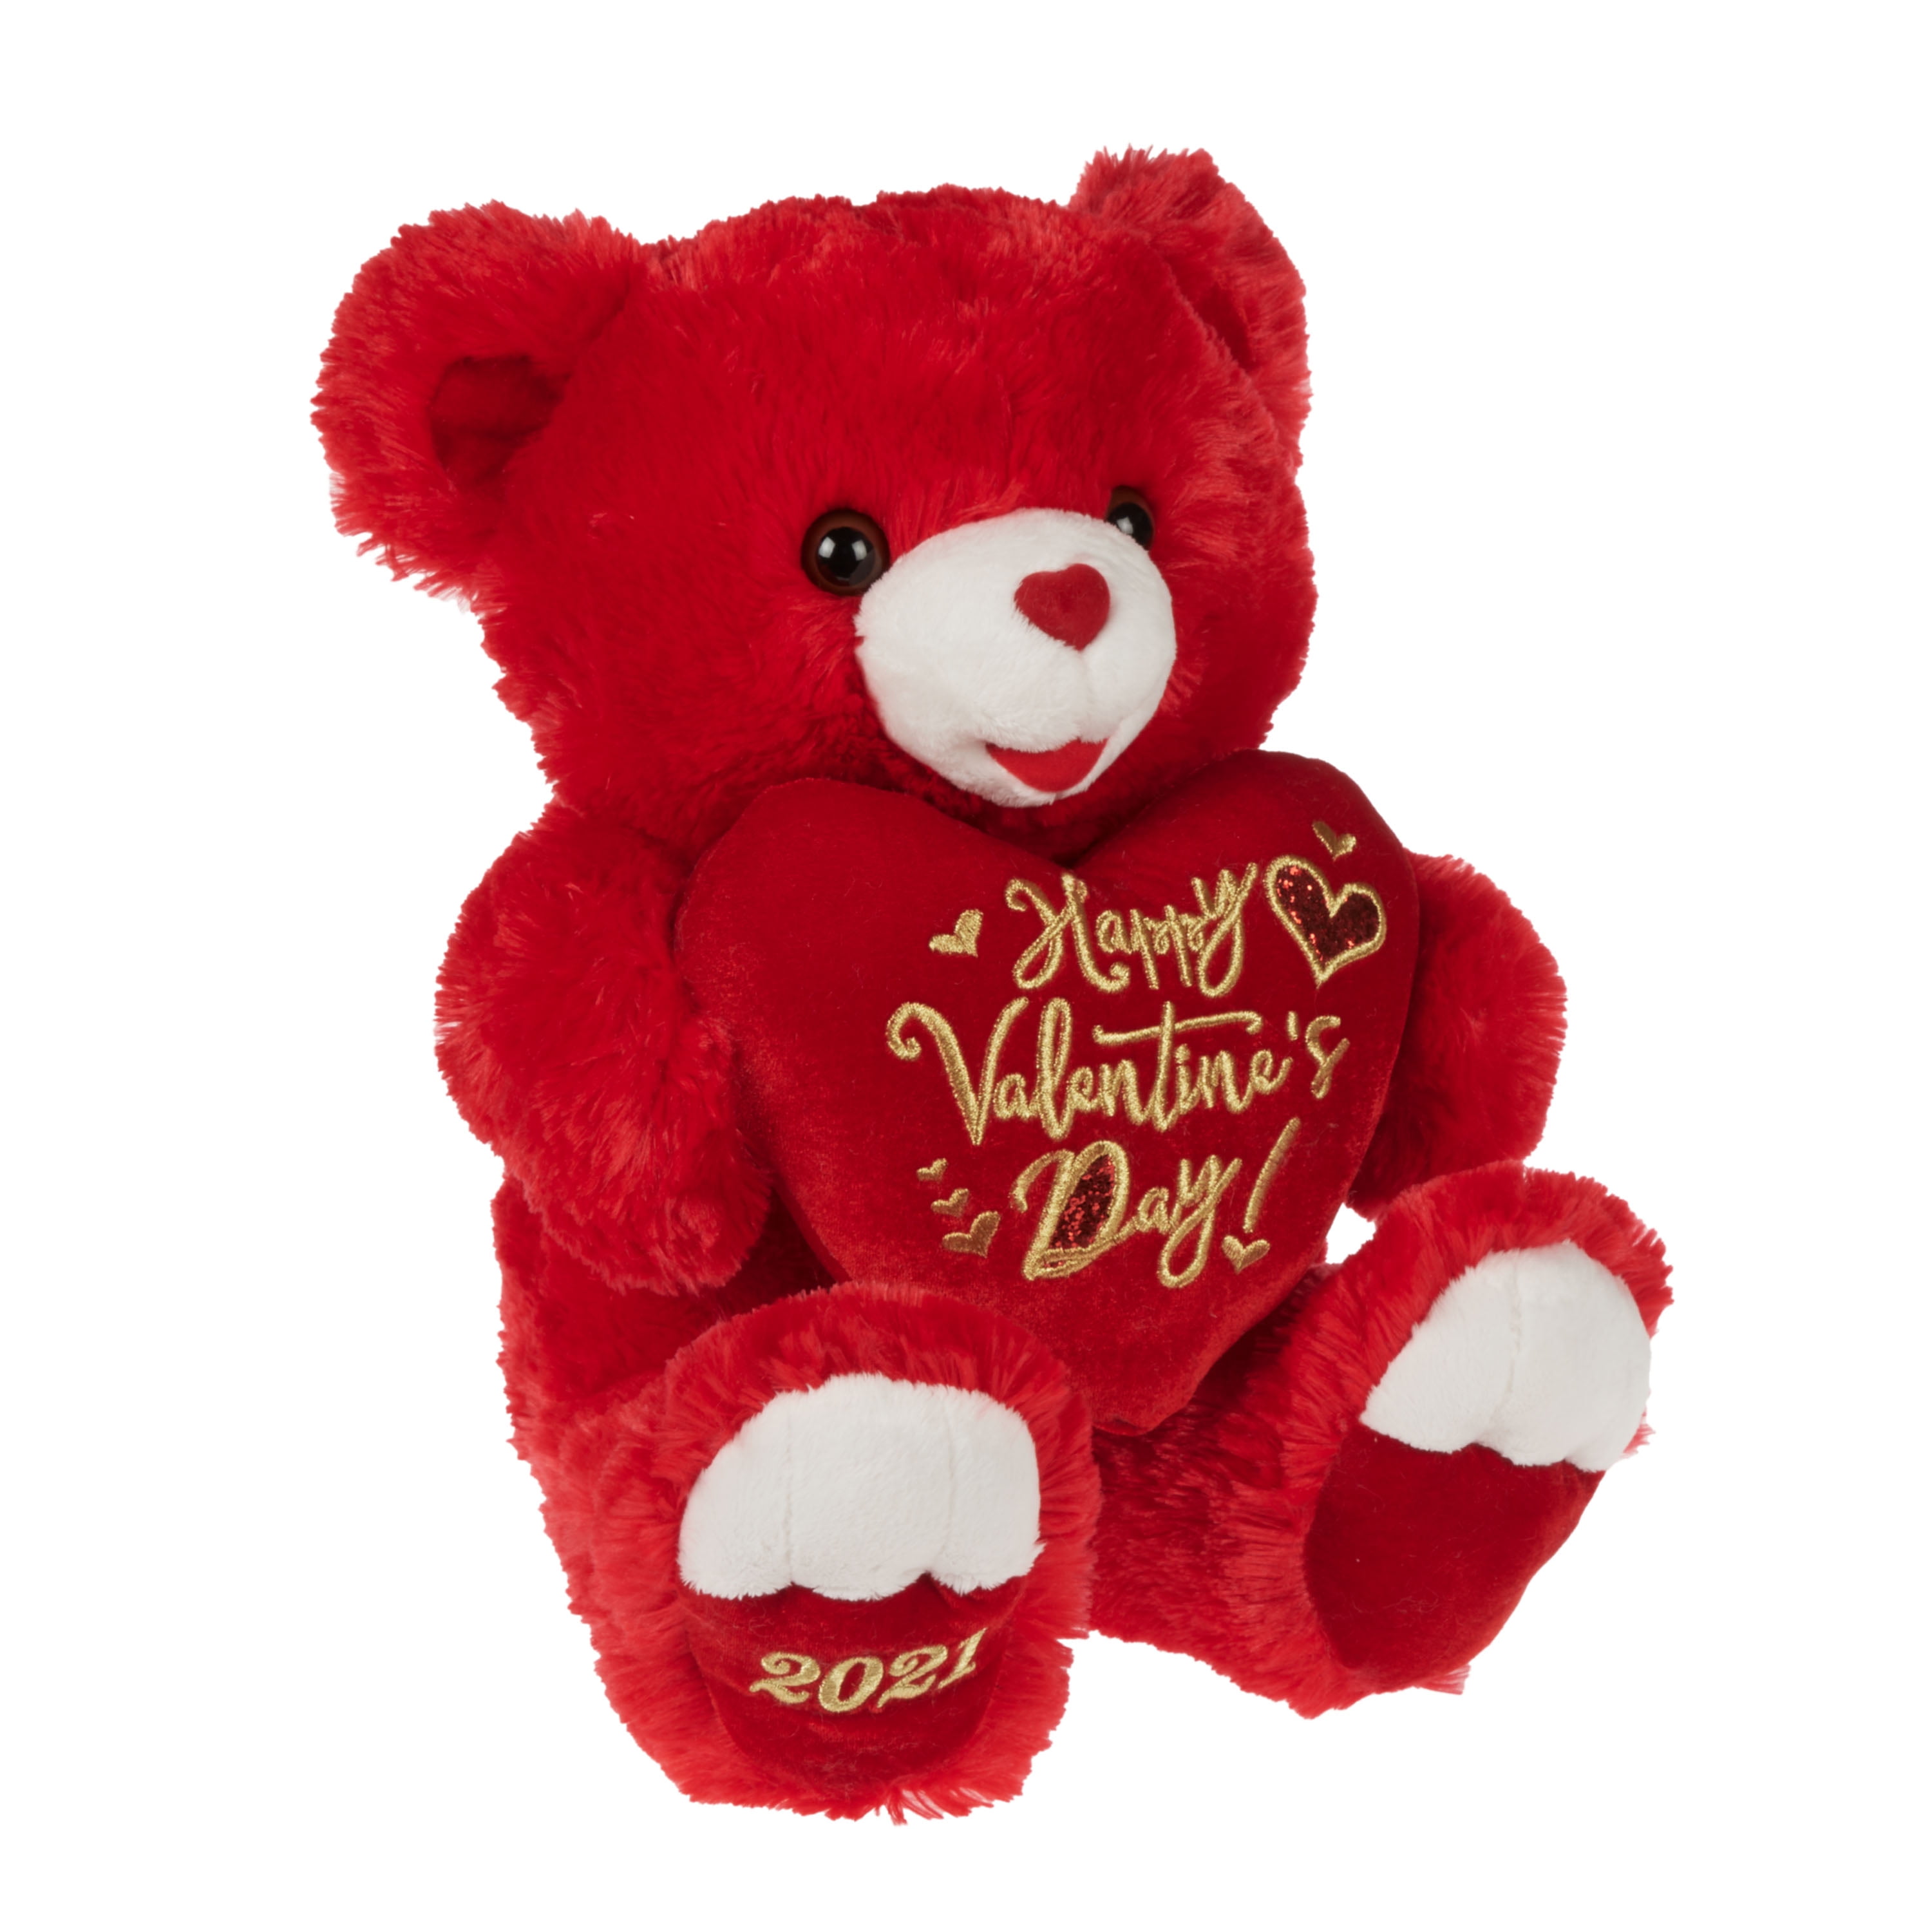 Small Cute Cuddly Adorable NEW Gift Present 15 X RED Teddy Bears 